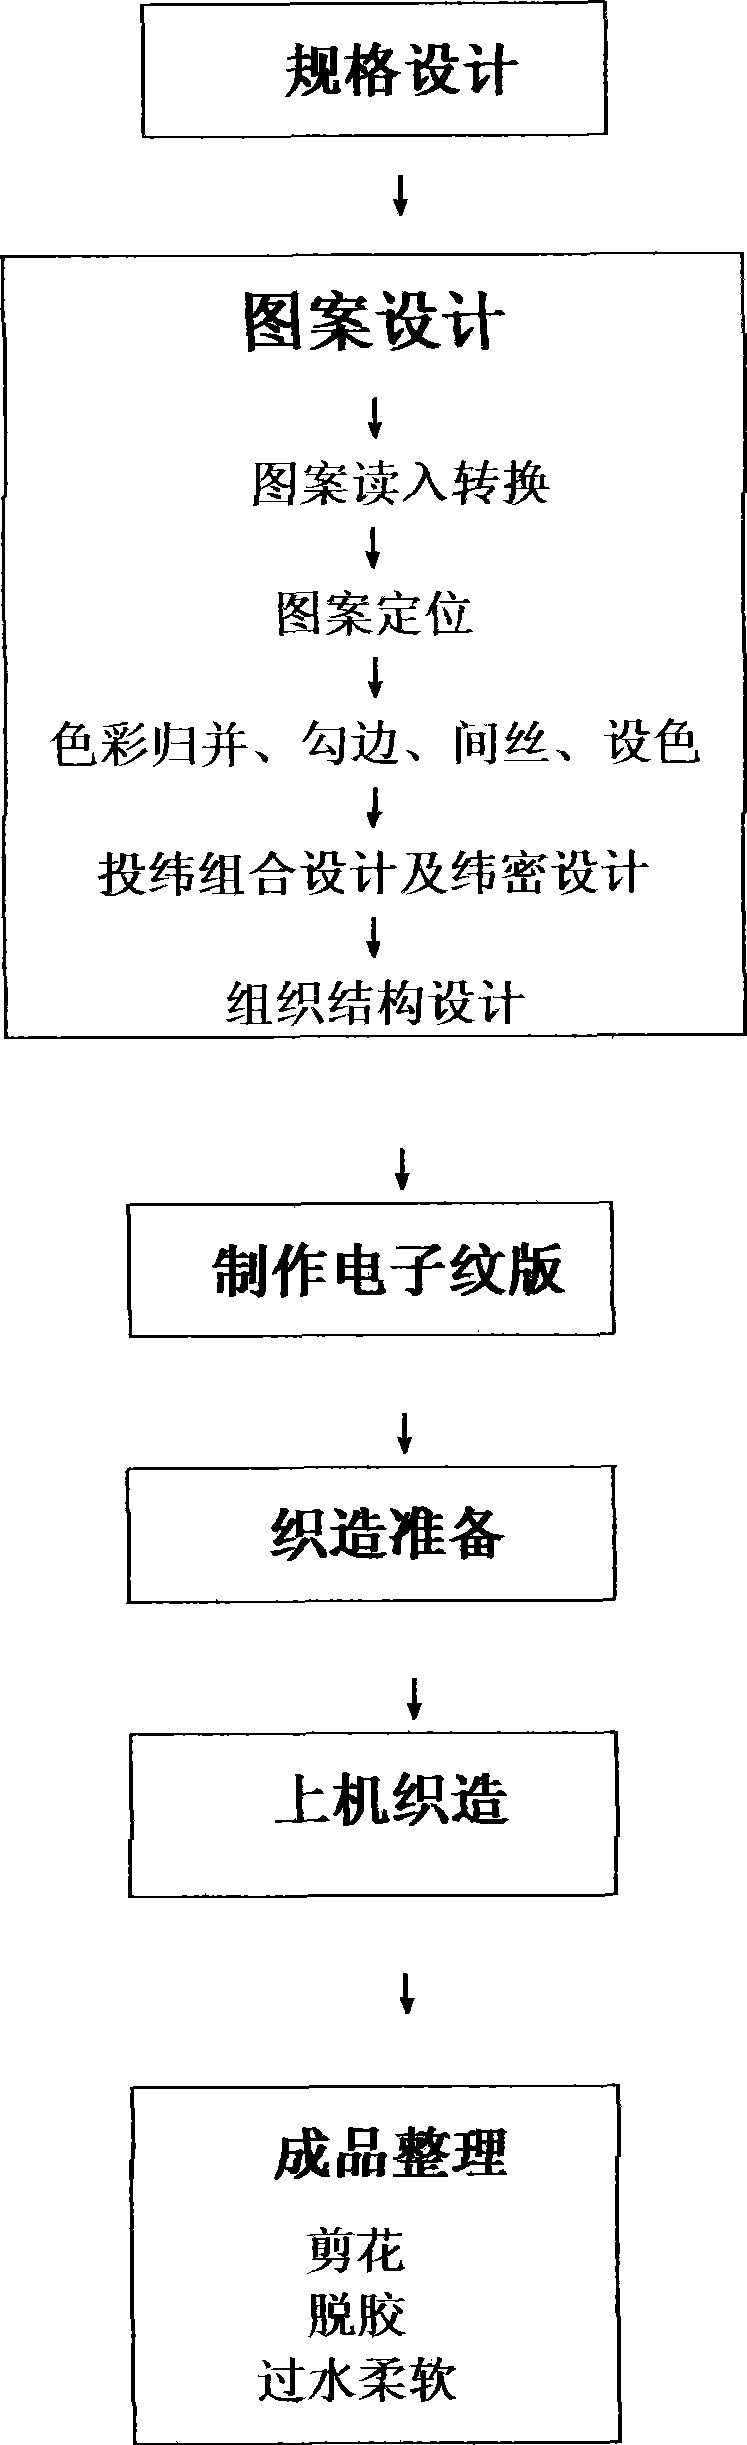 Production method of figured cloth different from embroidery characteristics